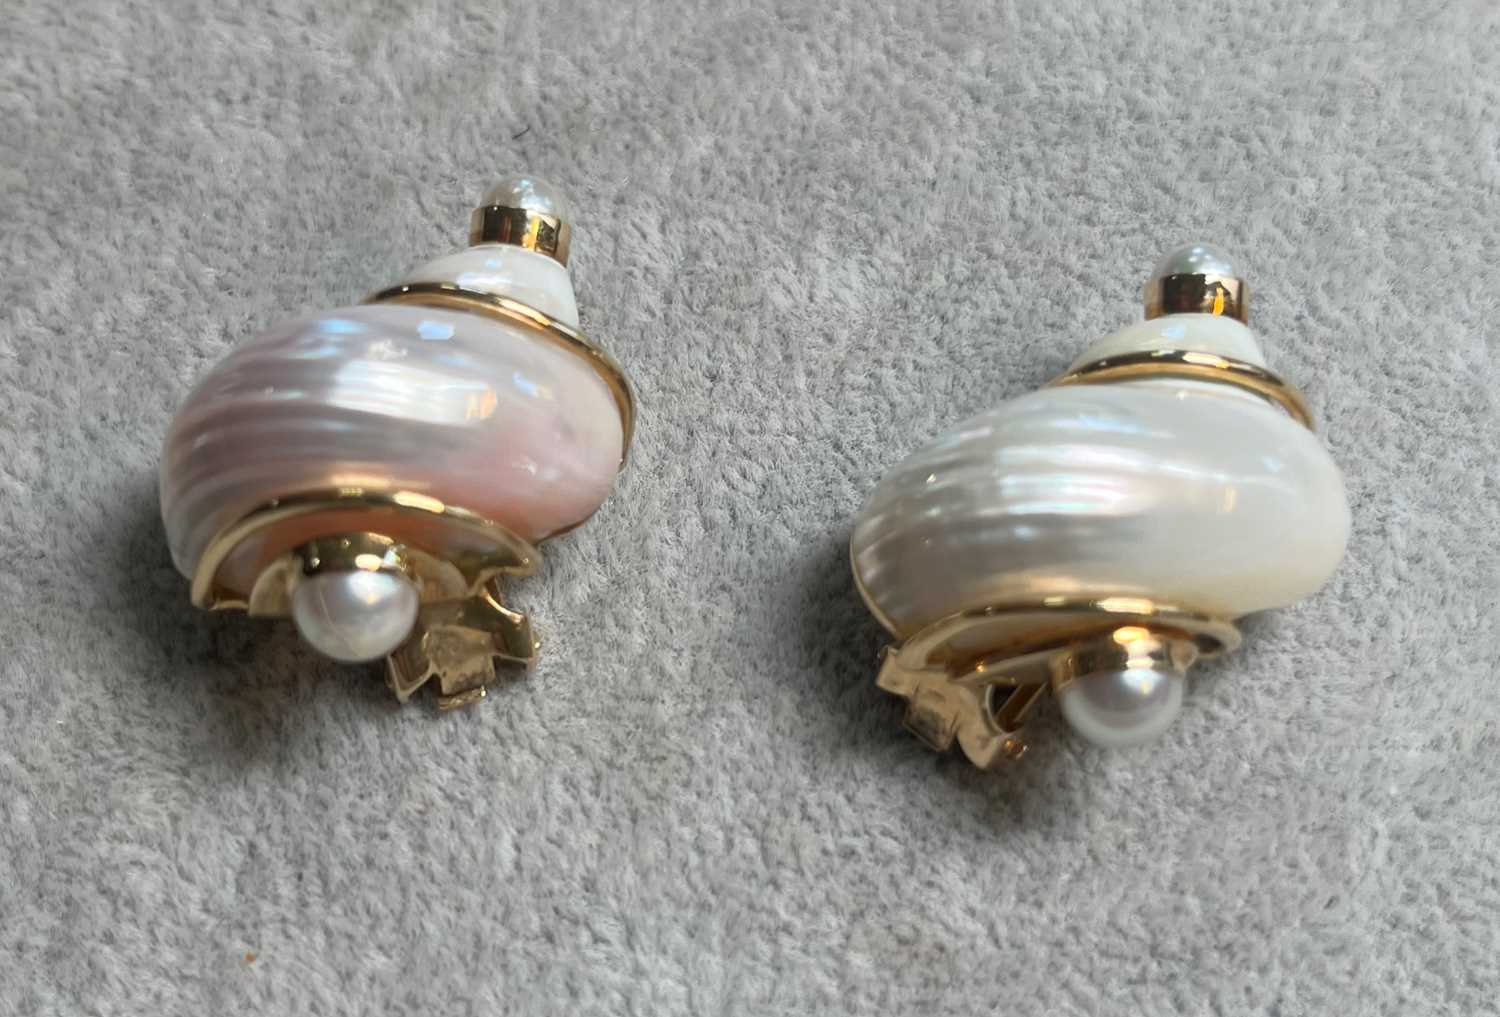 A pair of Turbo Shell clip earrings, by Seaman Schepps, - Image 4 of 5